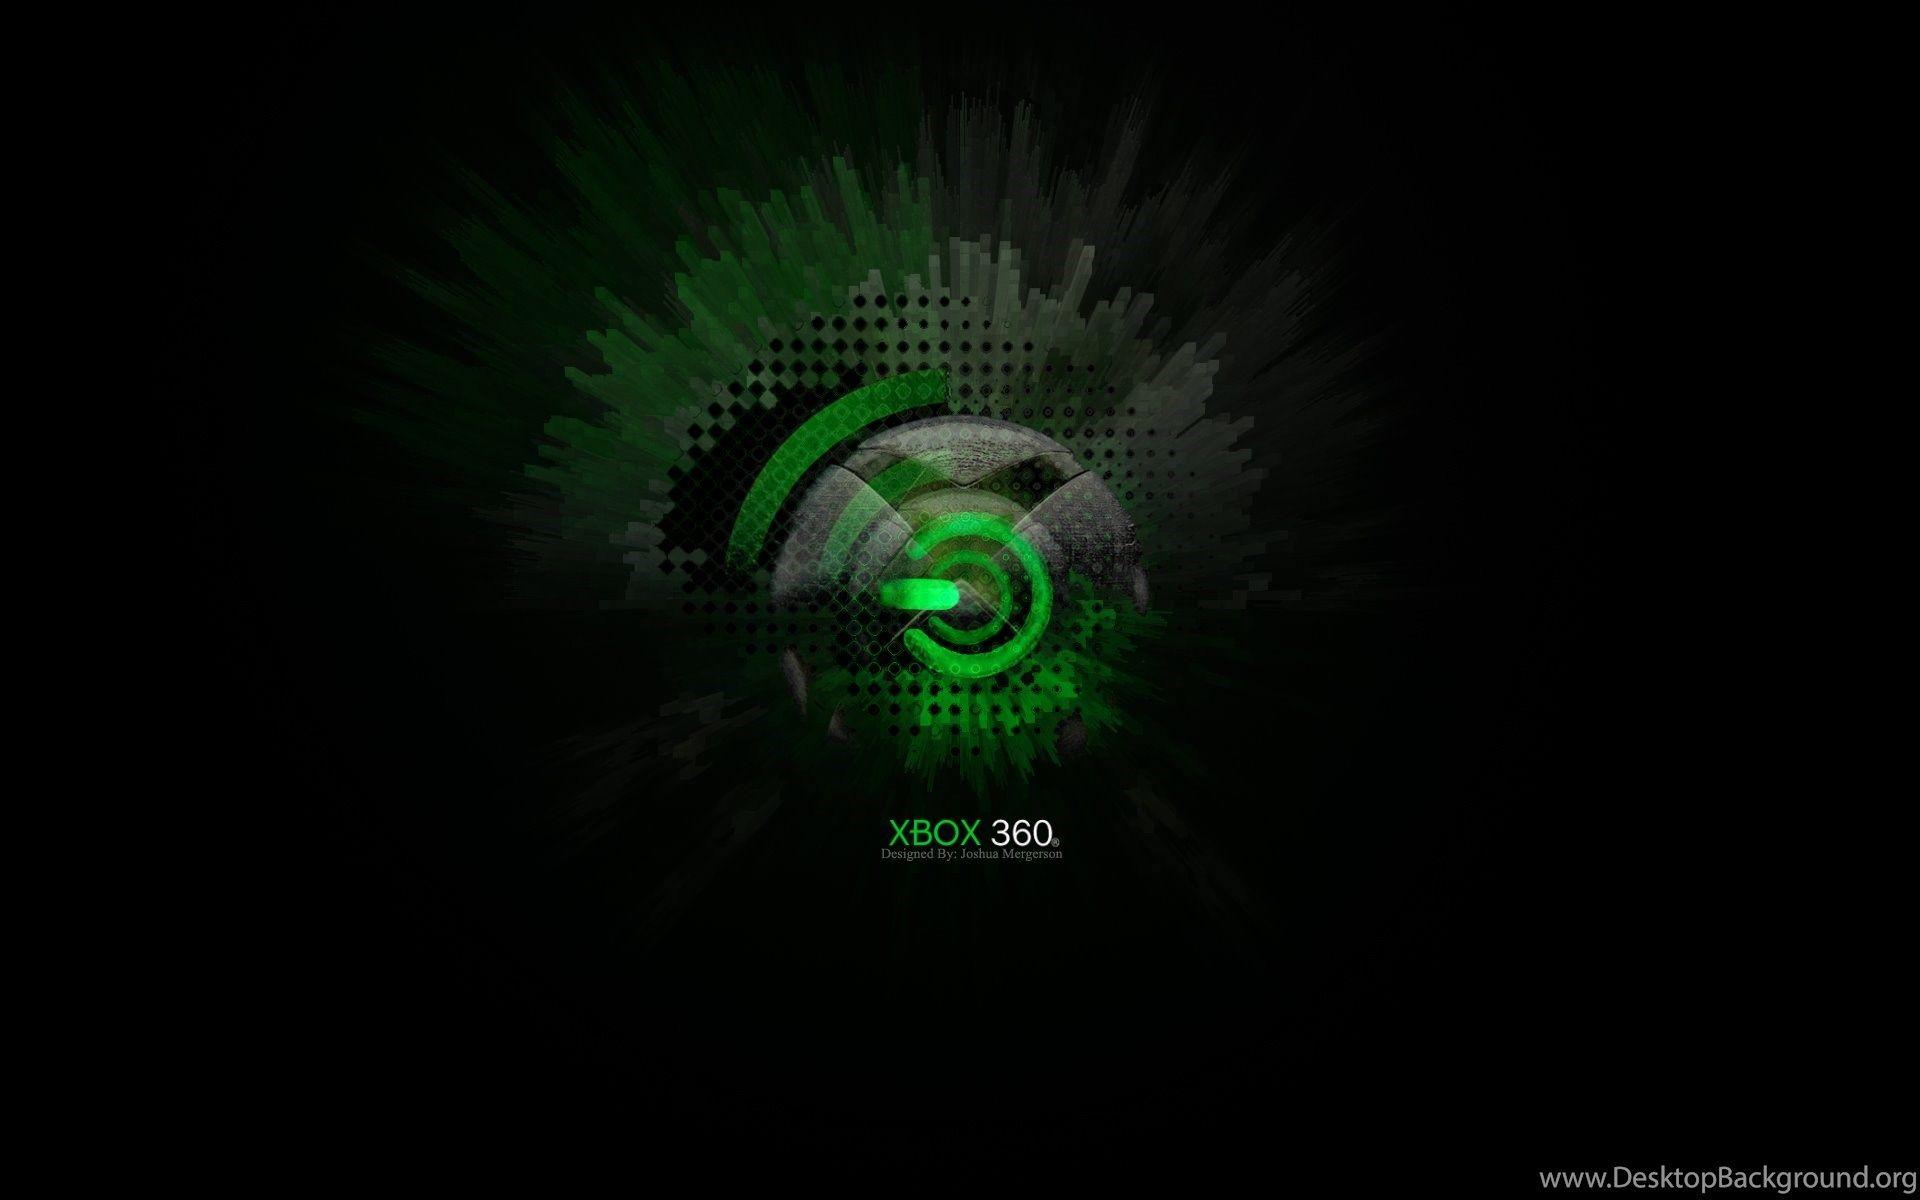 Wallpaper: XBOX Computer, Black Background, Green Switch